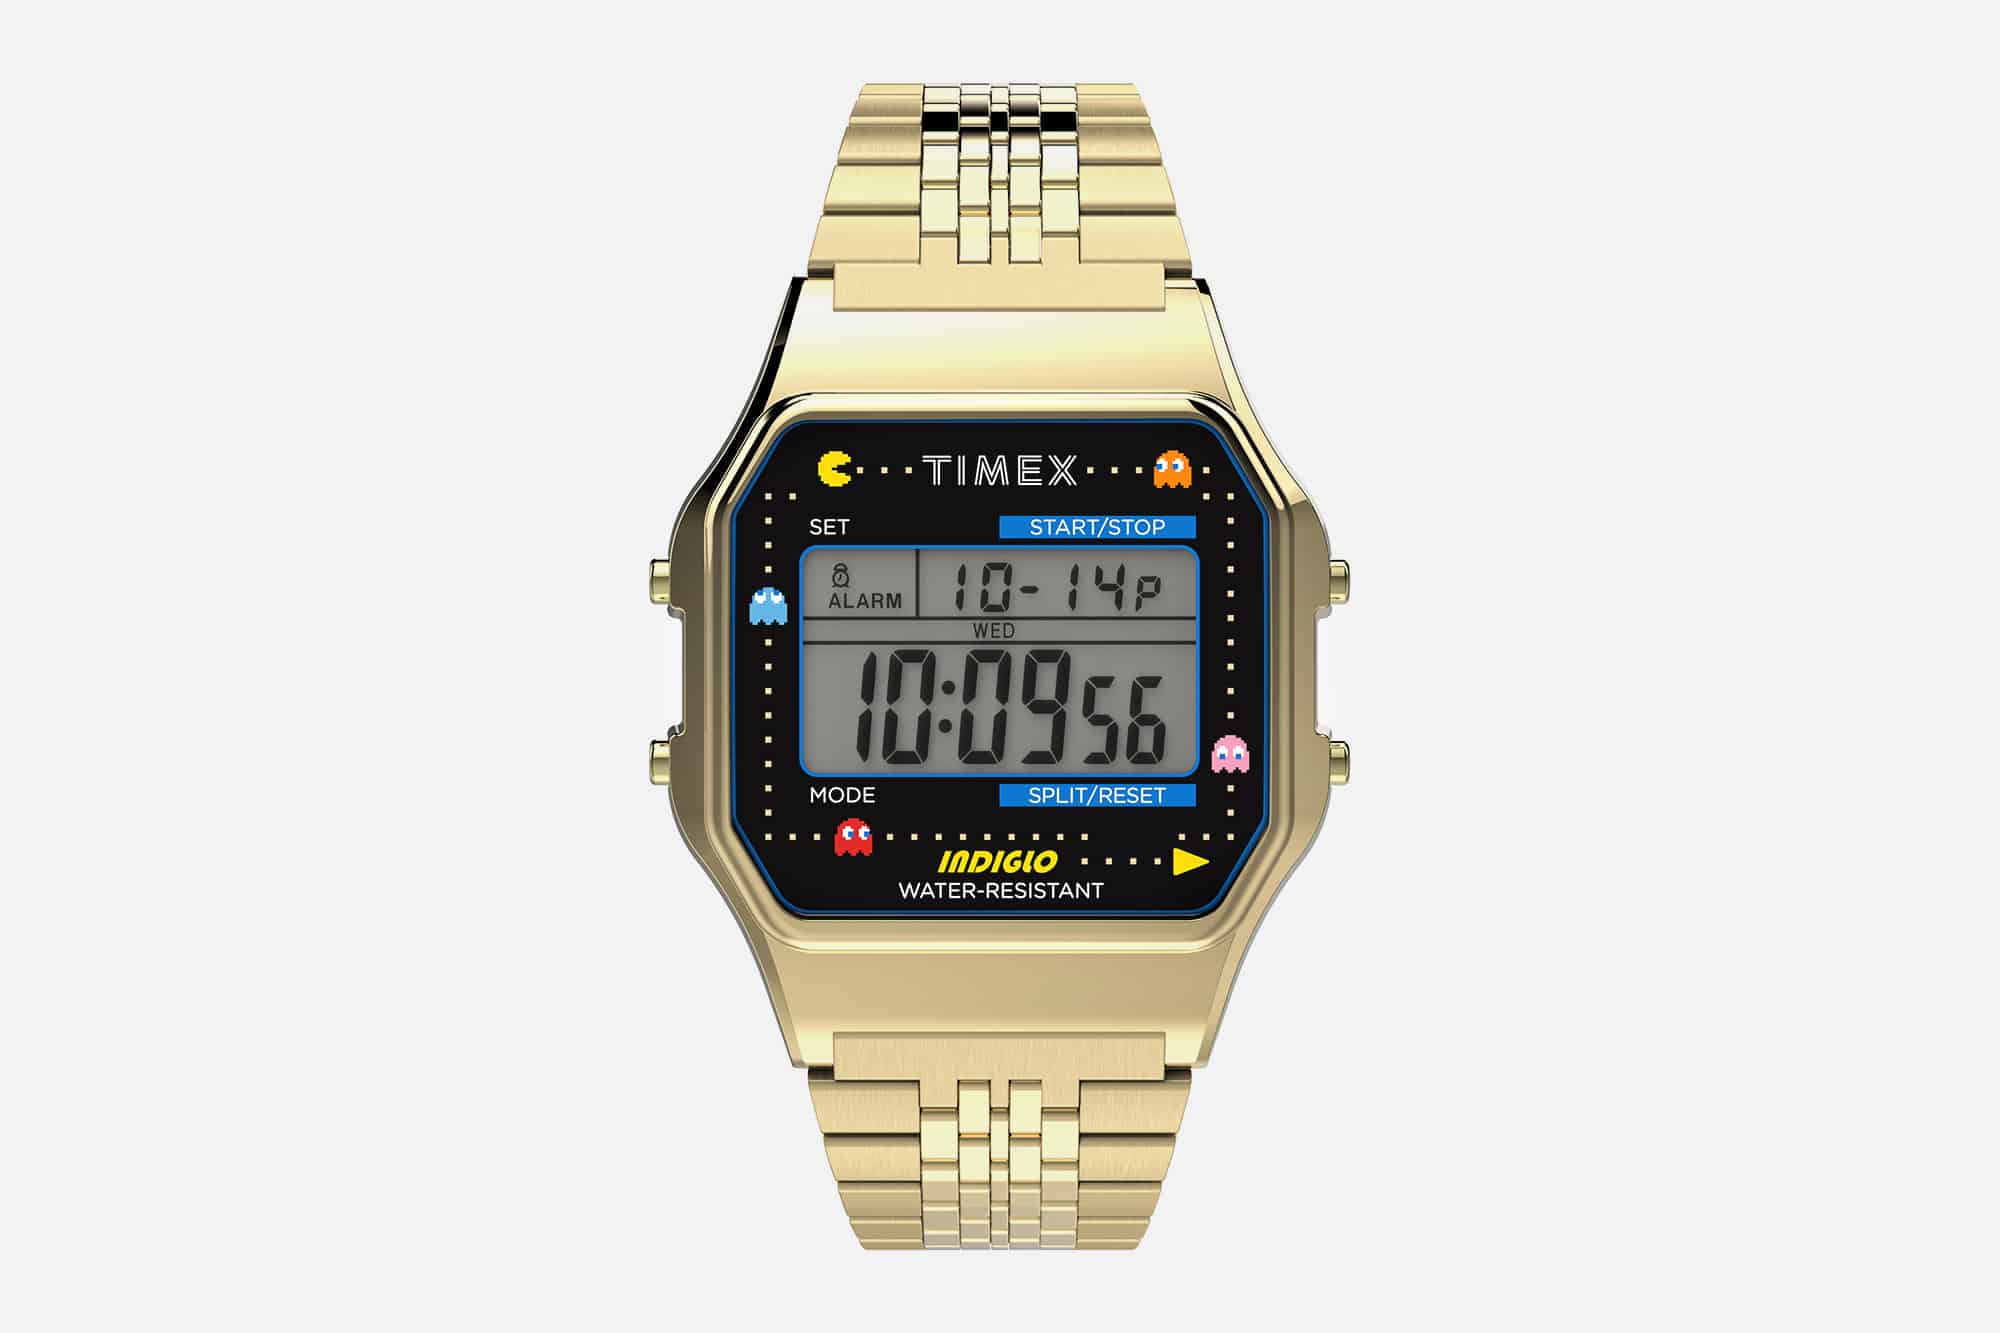 Timex Debuts More Fun, Value Oriented Watches that are Perfect for Summer